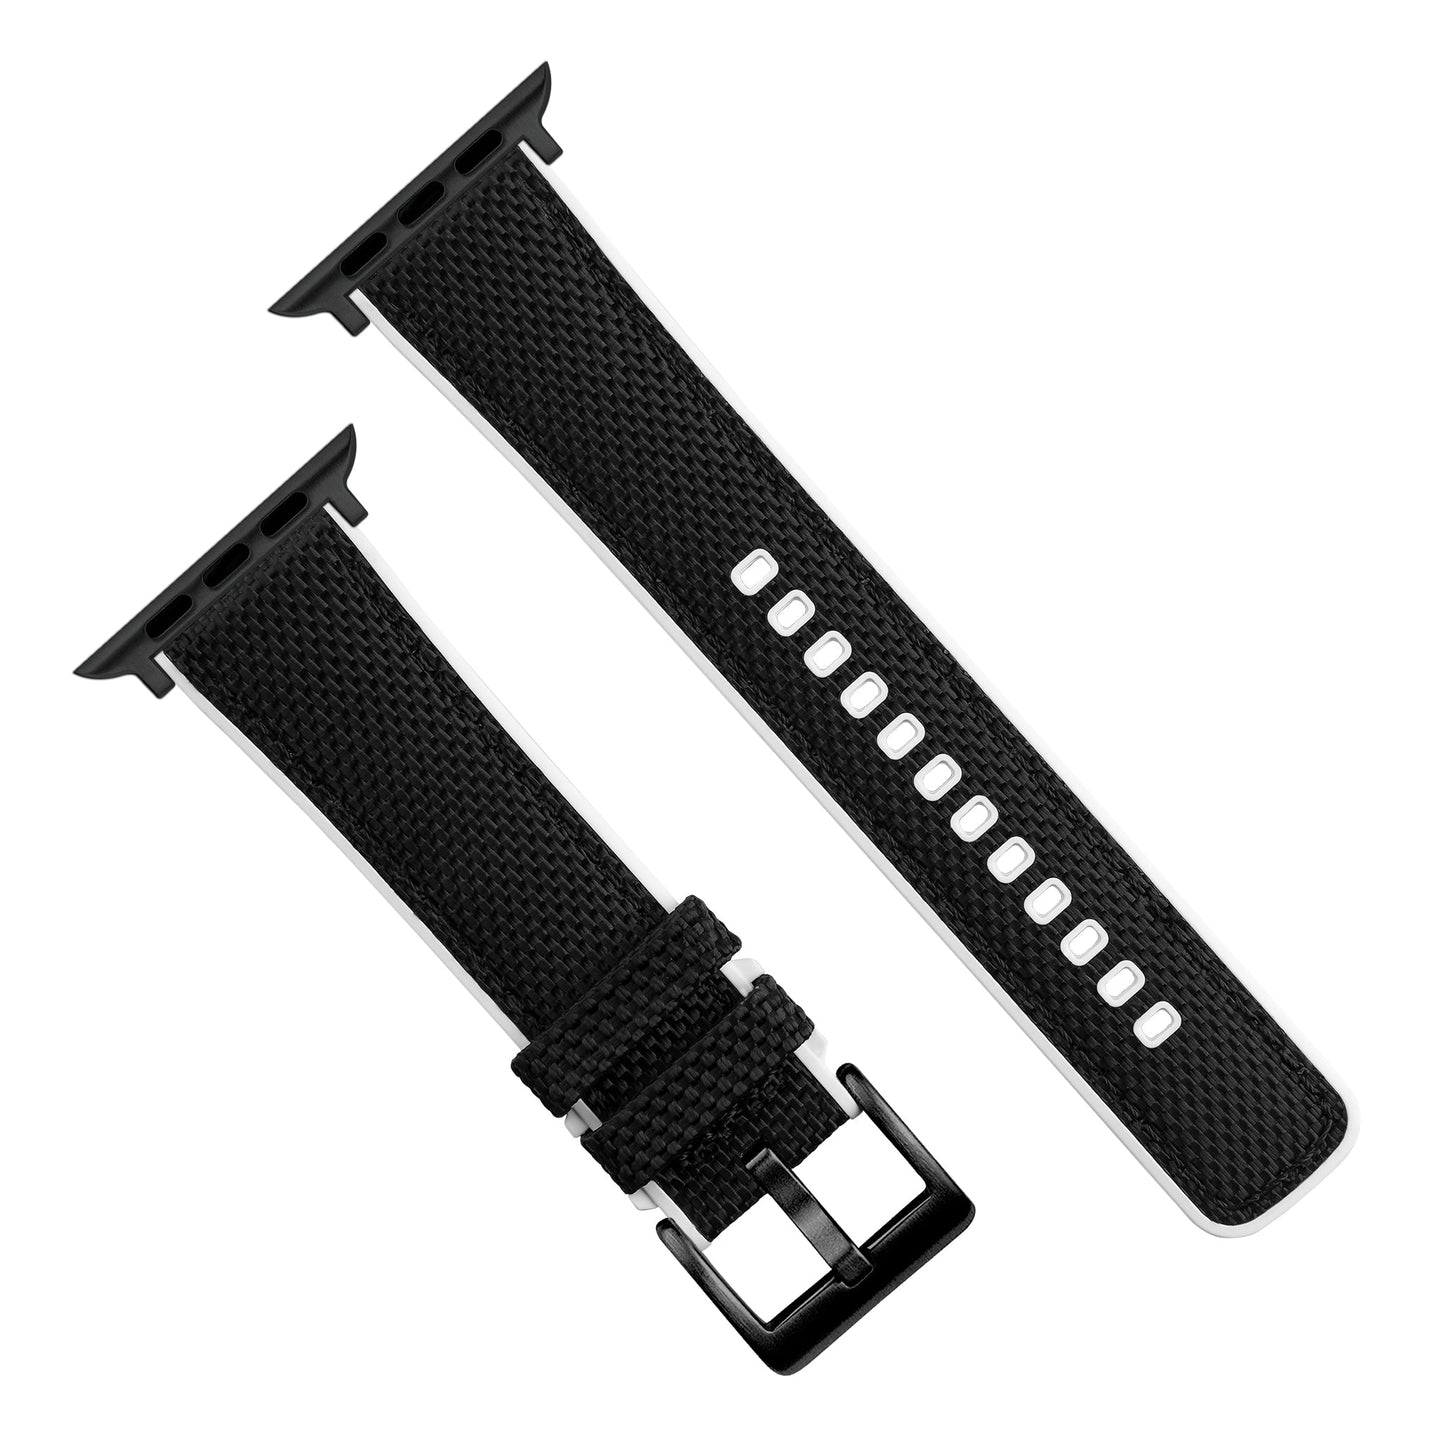 Apple Watch | Black Cordura Fabric and White Silicone Hybrid by Barton Watch Bands